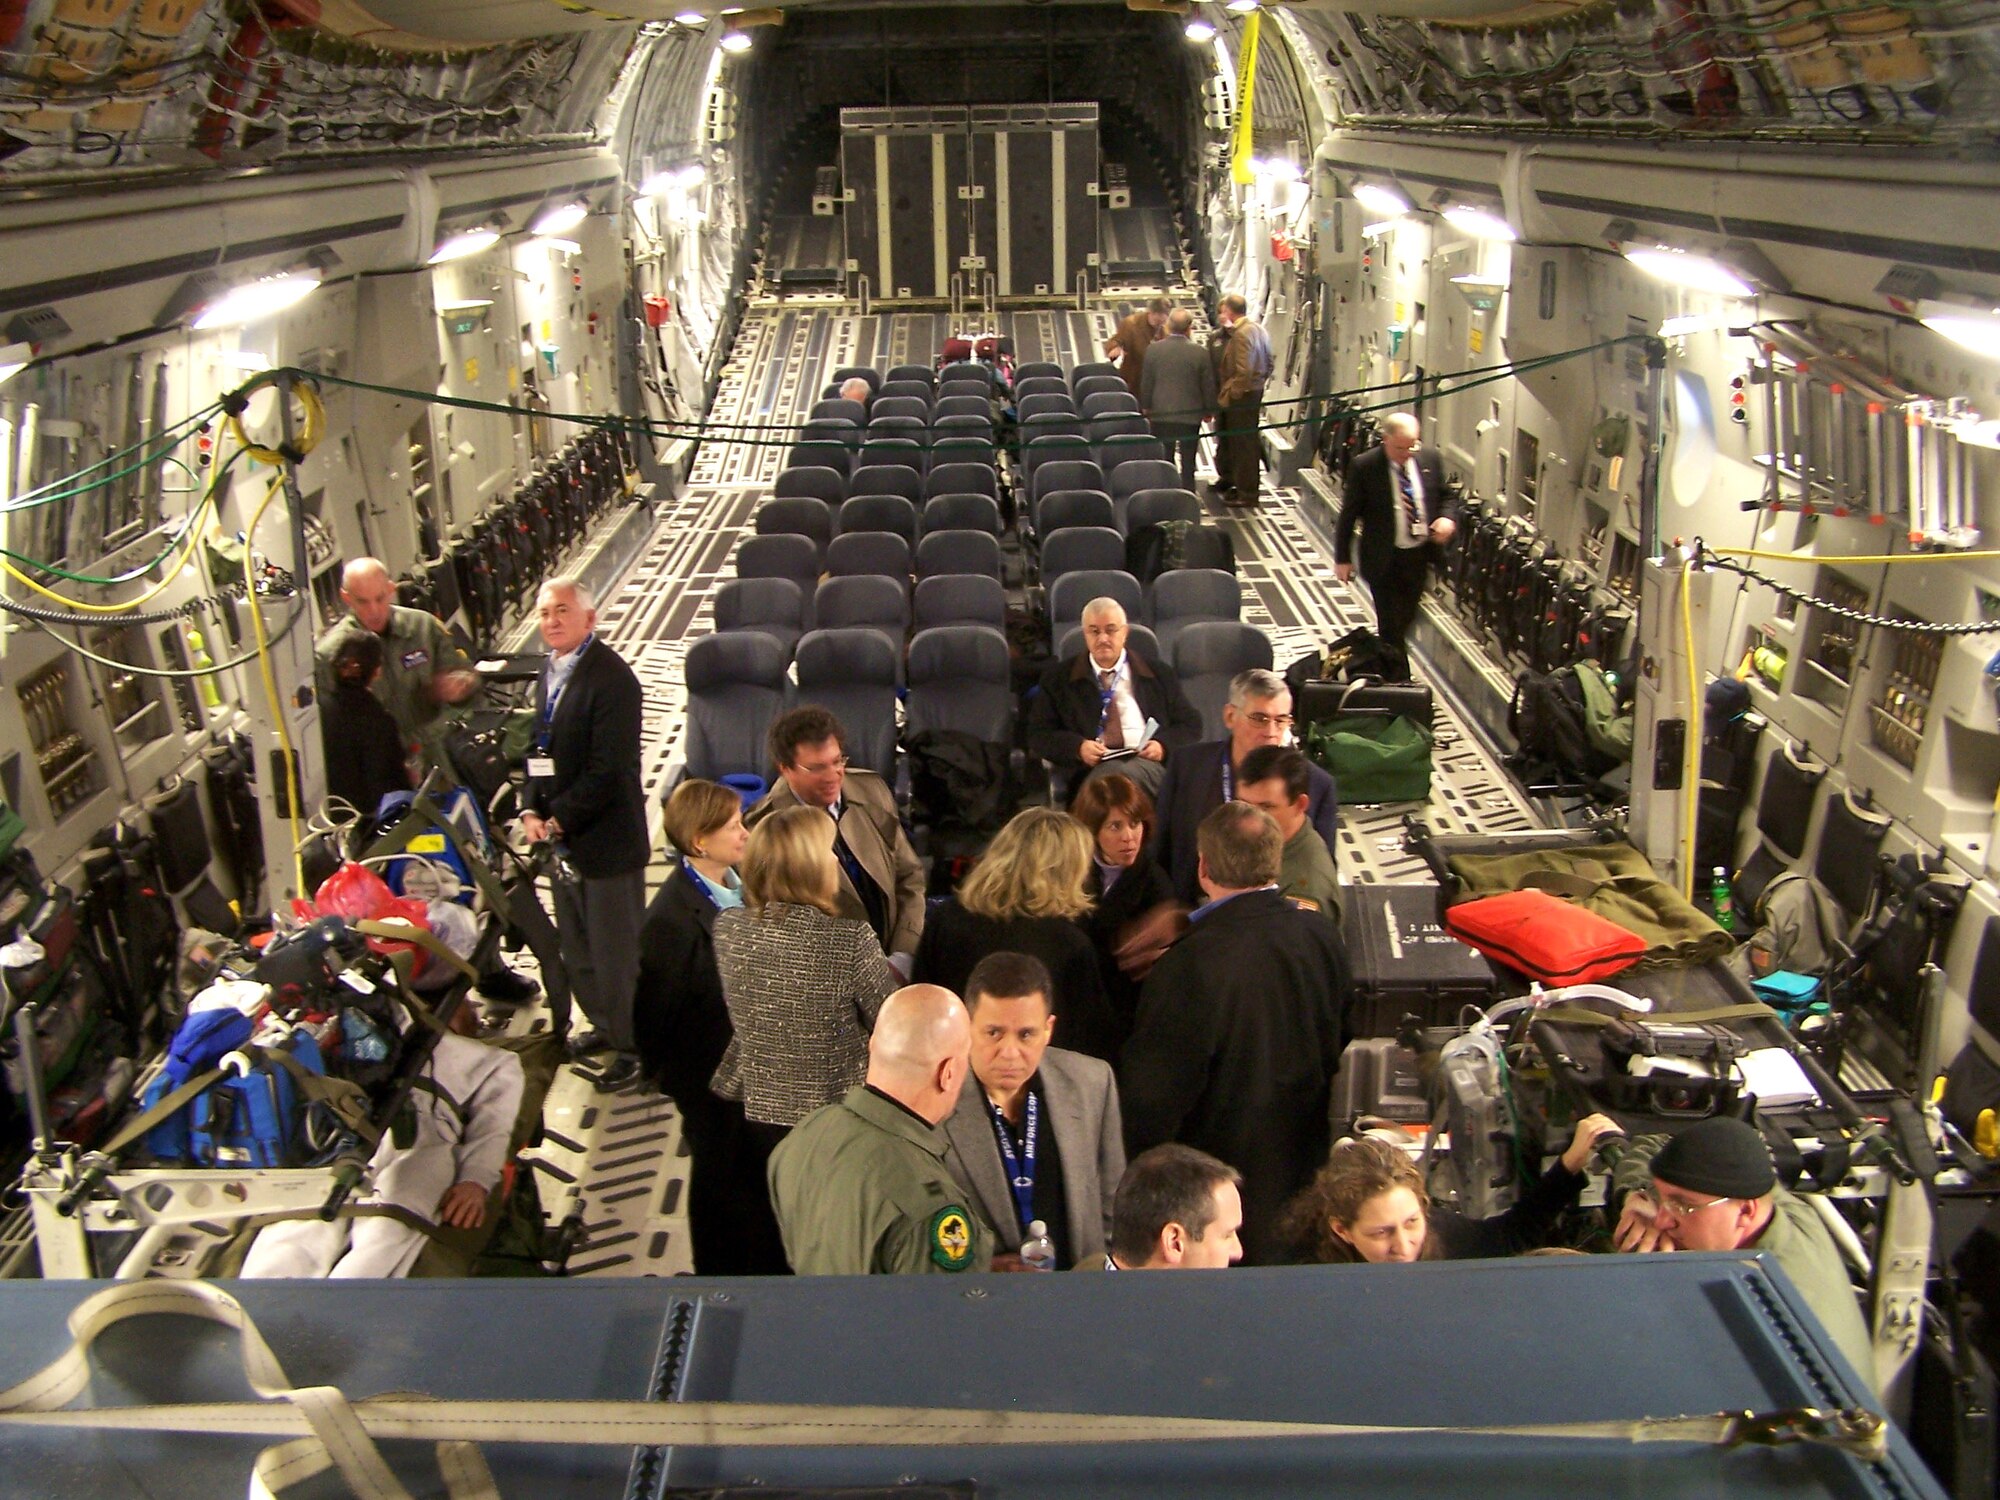 An air evacuation crew from the 183rd Aerial Evacuation Squadron in Jackson, Miss., and a critical care air transport team from the 81st Medical Group, Keesler Air Force Base, Miss., explain the processes involved in transporting patients aboard a C-17 Globemaster III aeromedical evacuation flight to a group of high-level medical professionals on Jan. 23, part of a national civic outreach tour enroute to Wilford Hall Medical Center in San Antonio. (U.S. Air Force photo/Master Sgt. Chris Miller)
  
